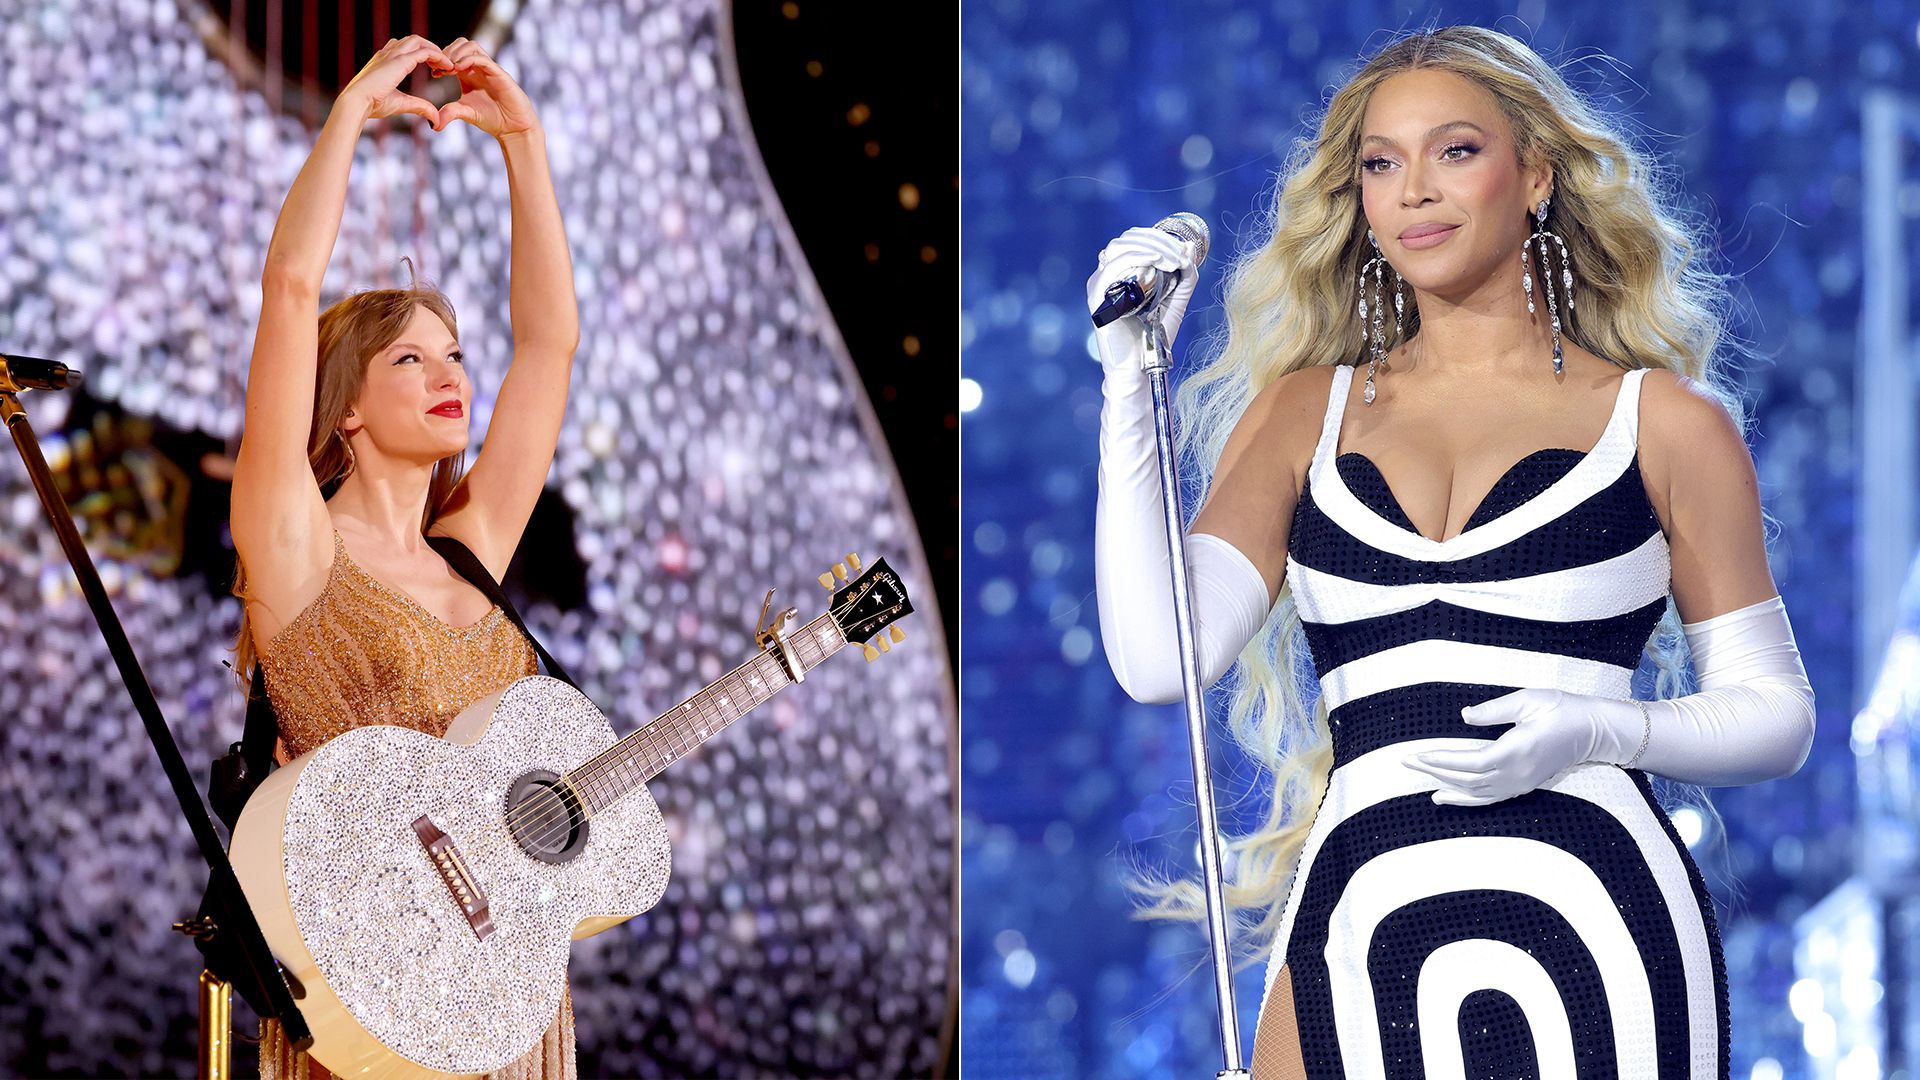 A composite image showing pictures of Taylor Swift and Beyonce at concerts this year.